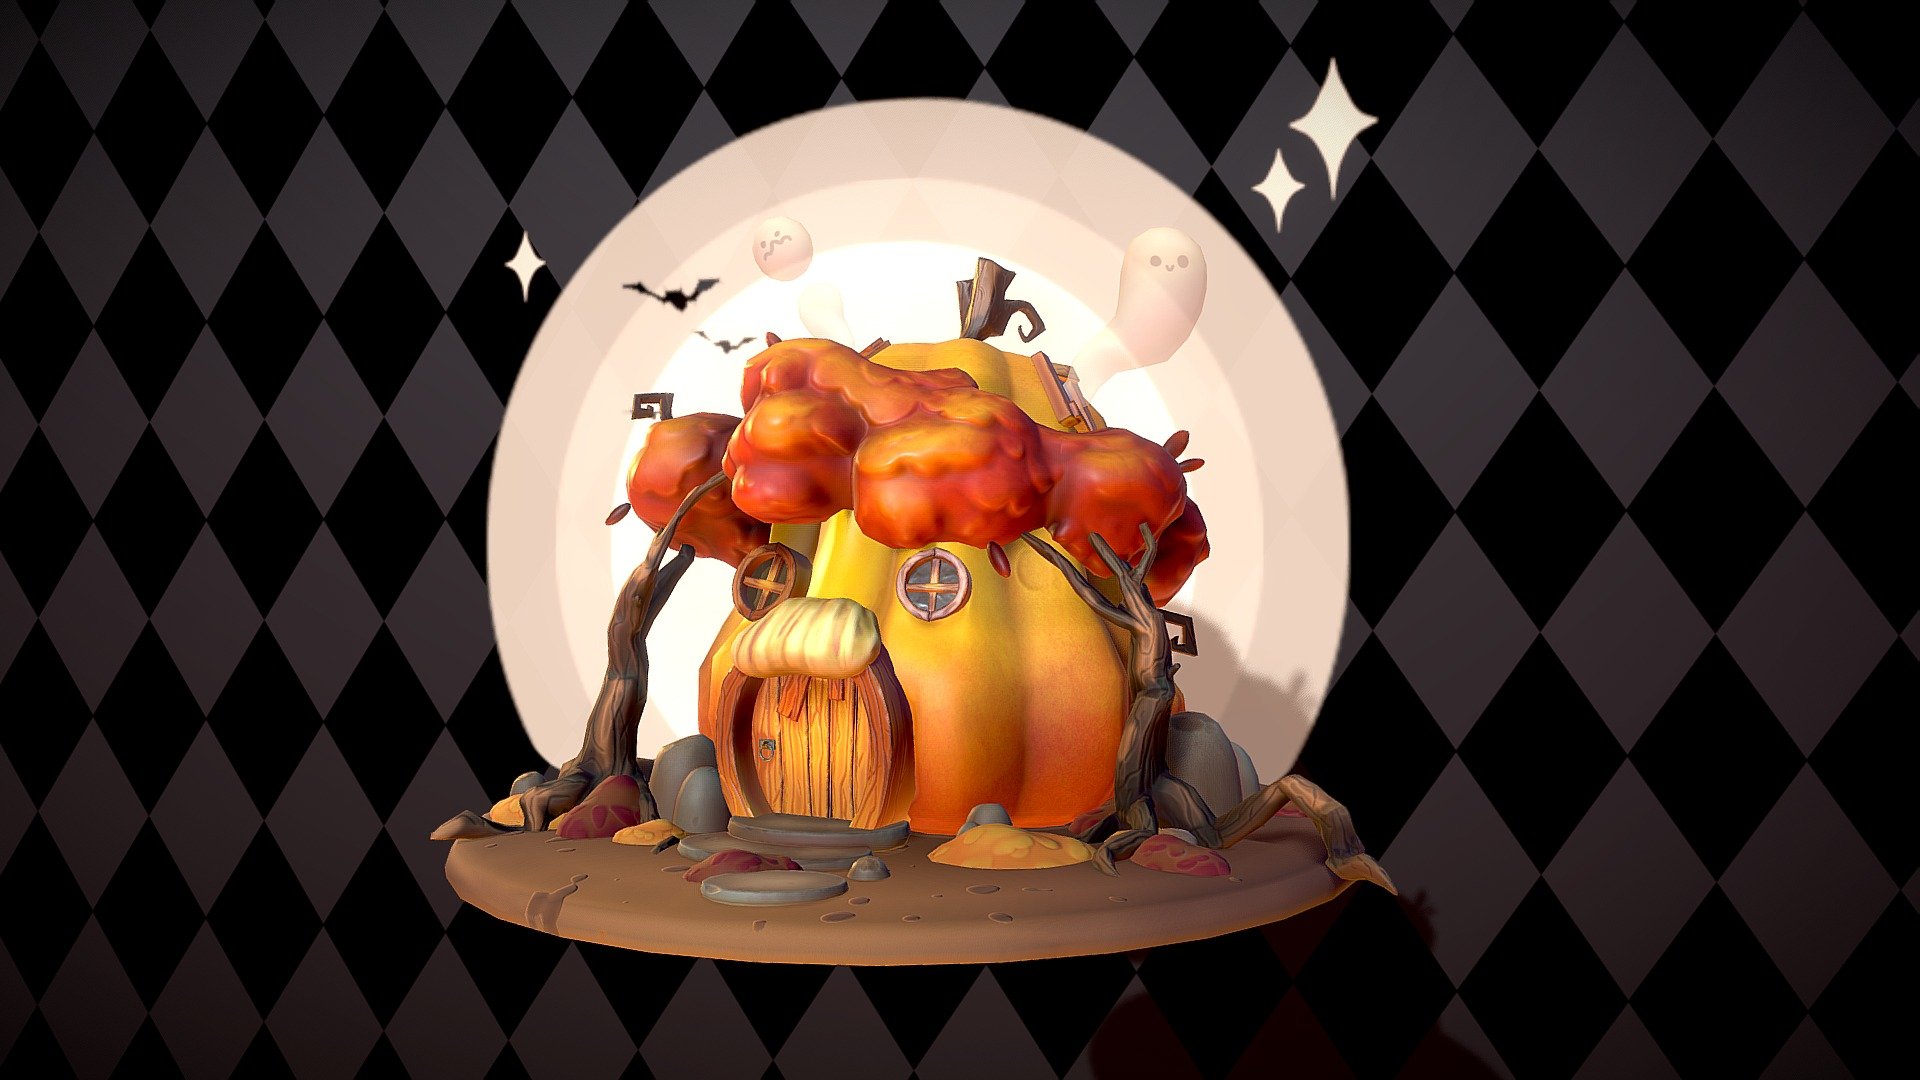 Happy Halloween everyone! 
For a stylized pumpkin challenge I decided to grab my pencil &amp; make my own design for once, so here you see the 3D translated version!
It was a very rushed project between my school deadlines but I'm still satisfied with the result for now.
Feedback is always welcome and I hope you like it :)

BGM : [MapleStory BGM] Halloween Main Hall (KMS 1.2.175) - Spoopy Halloween! - 3D model by Gia Bao Lam (@gia.bao.lam) 3d model